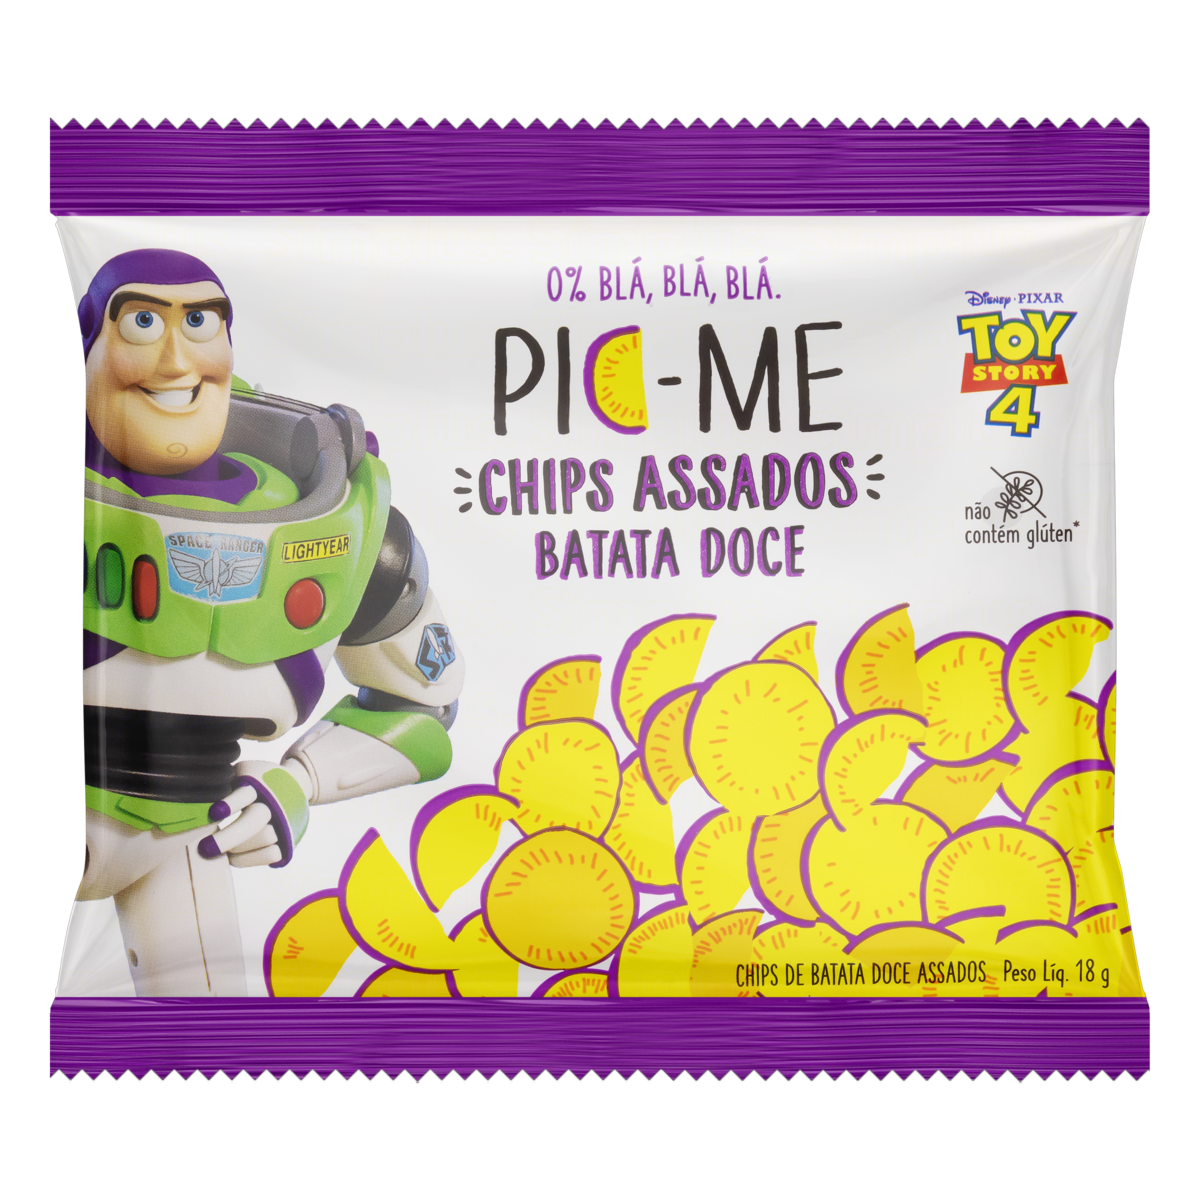 7899879300747 - CHIPS DE BATATA-DOCE TOY STORY 4 PIC-ME PACOTE 18G